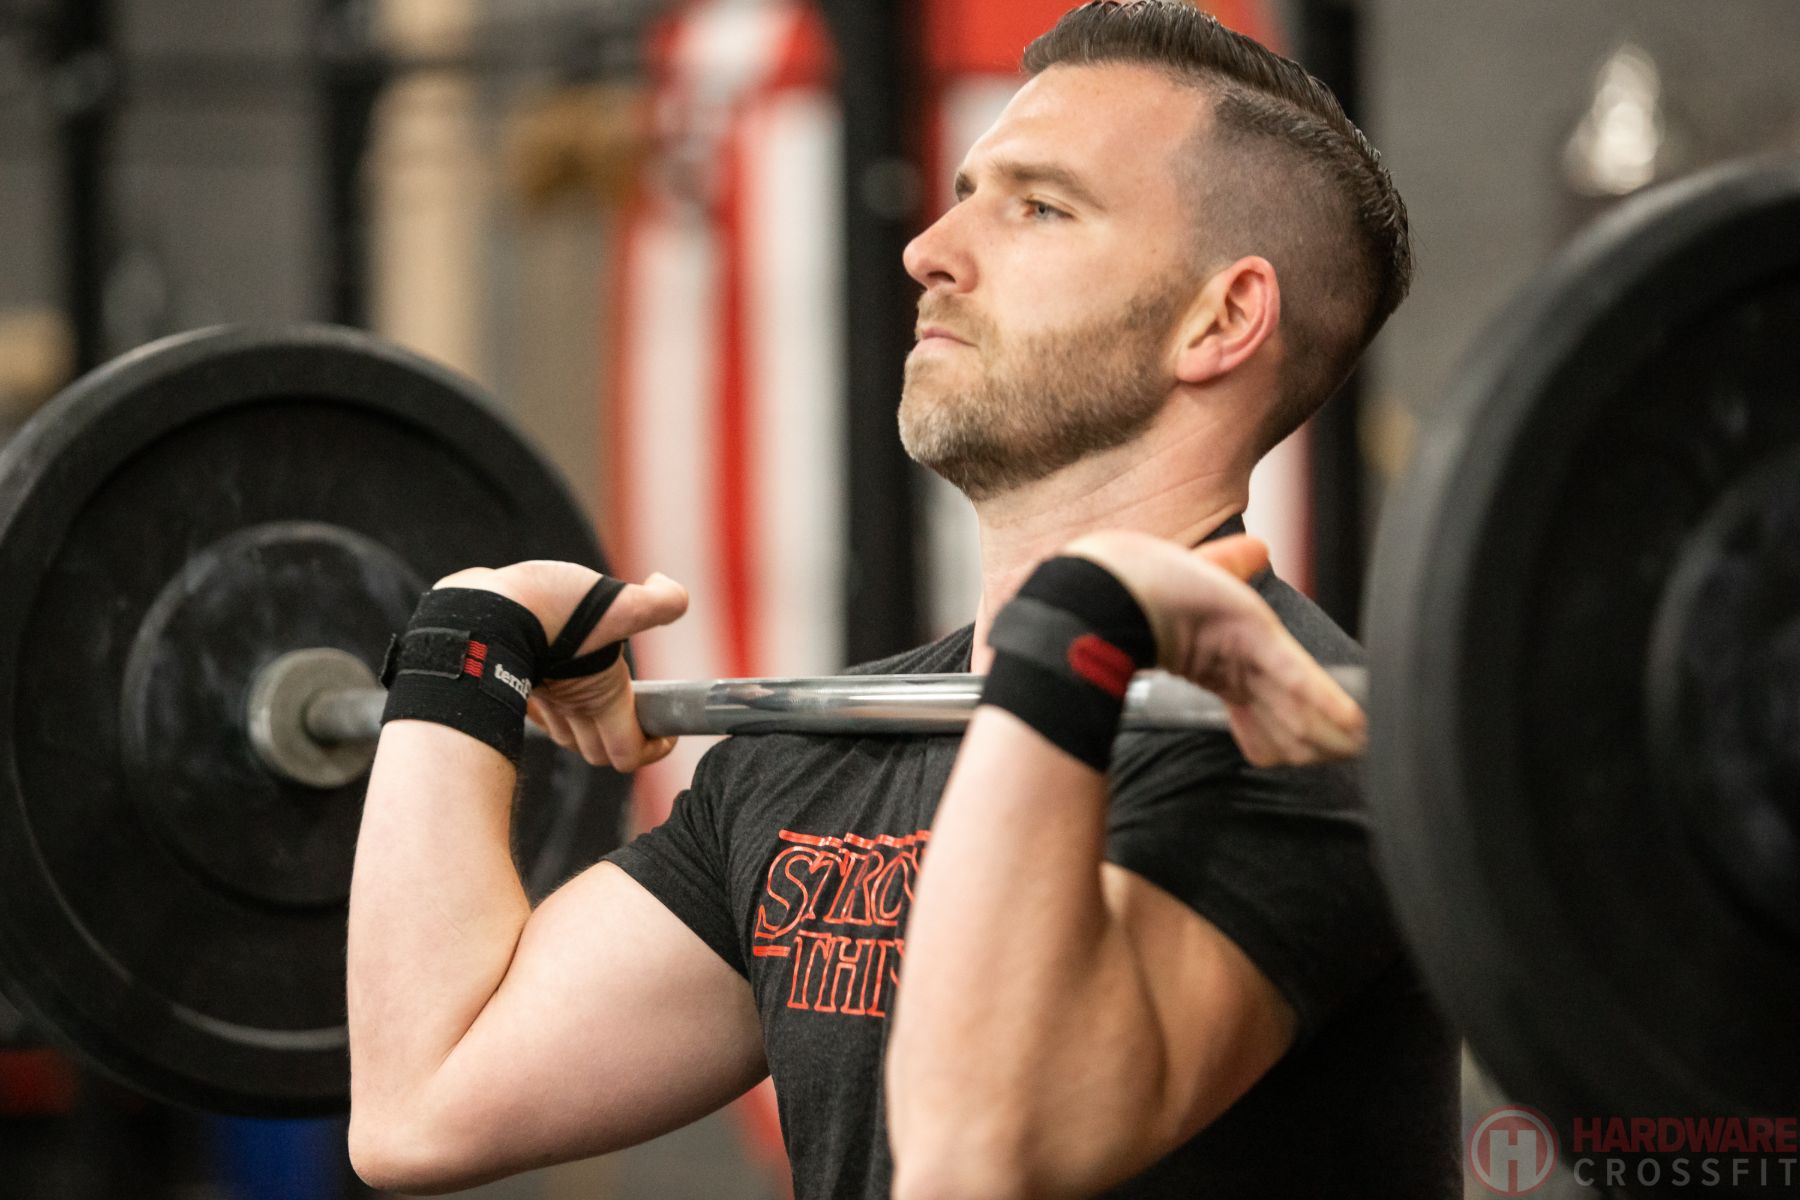 hardware-crossfit-march-15-2019-8511